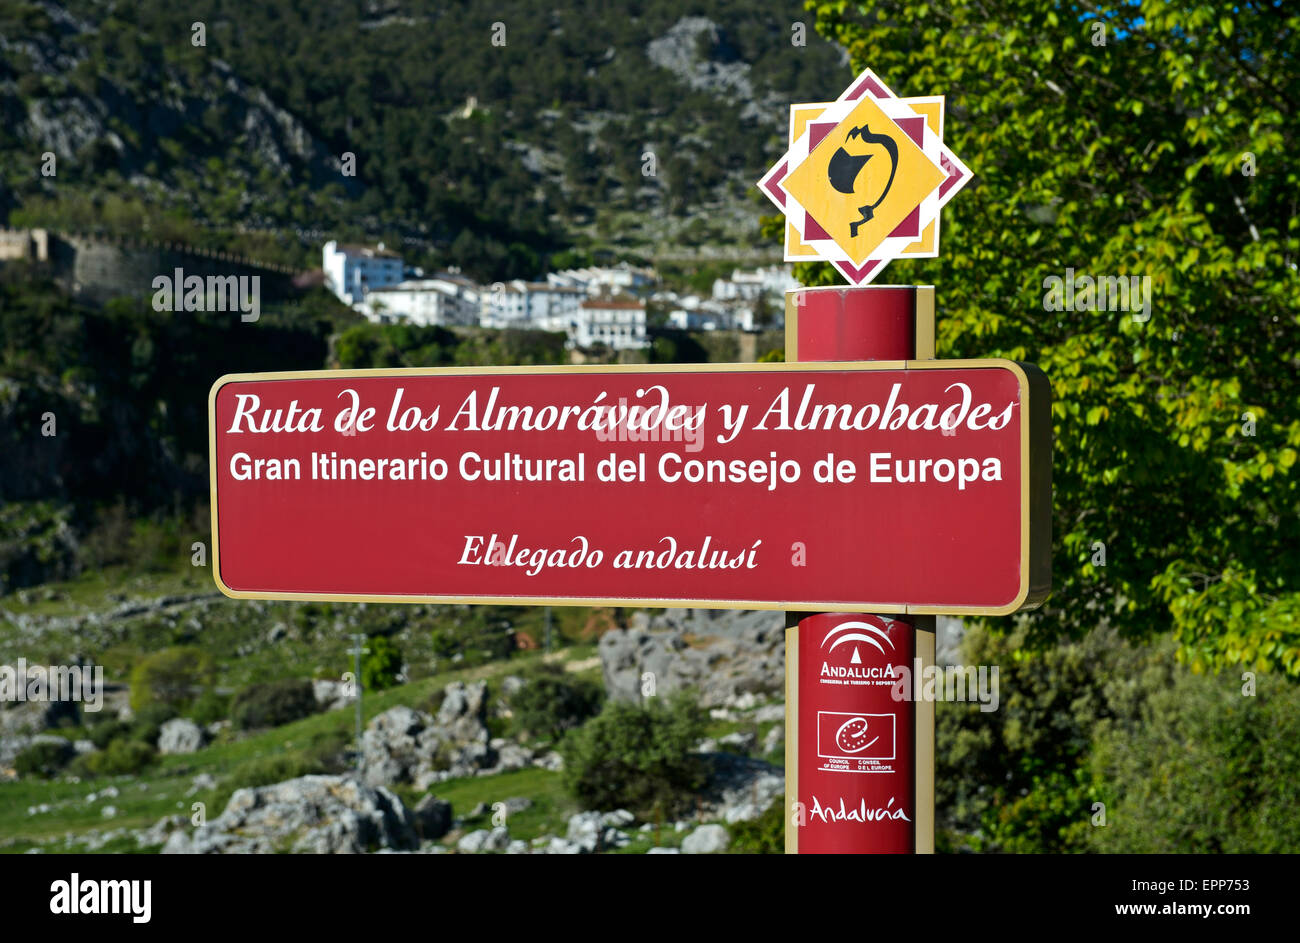 Signpost of the European Cultural Route The Legacy of Al-Andalus, Ruta de Almorávides y Almohades, near Grazalema, Spain Stock Photo